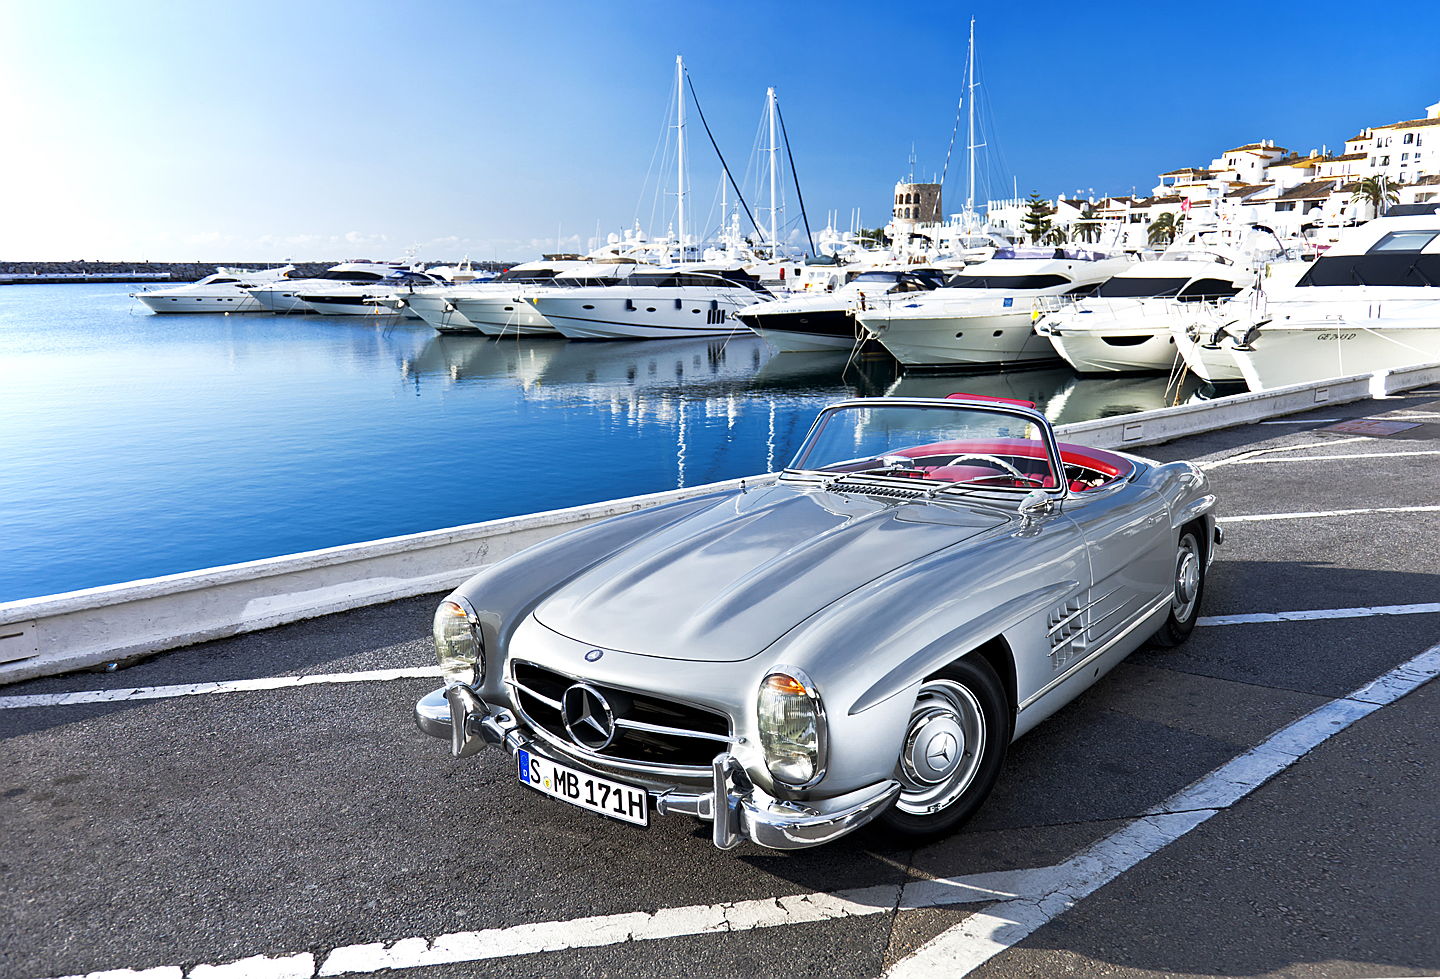 Marbella Turismo - Luxury, fashion and fancy cars in Puerto Banús